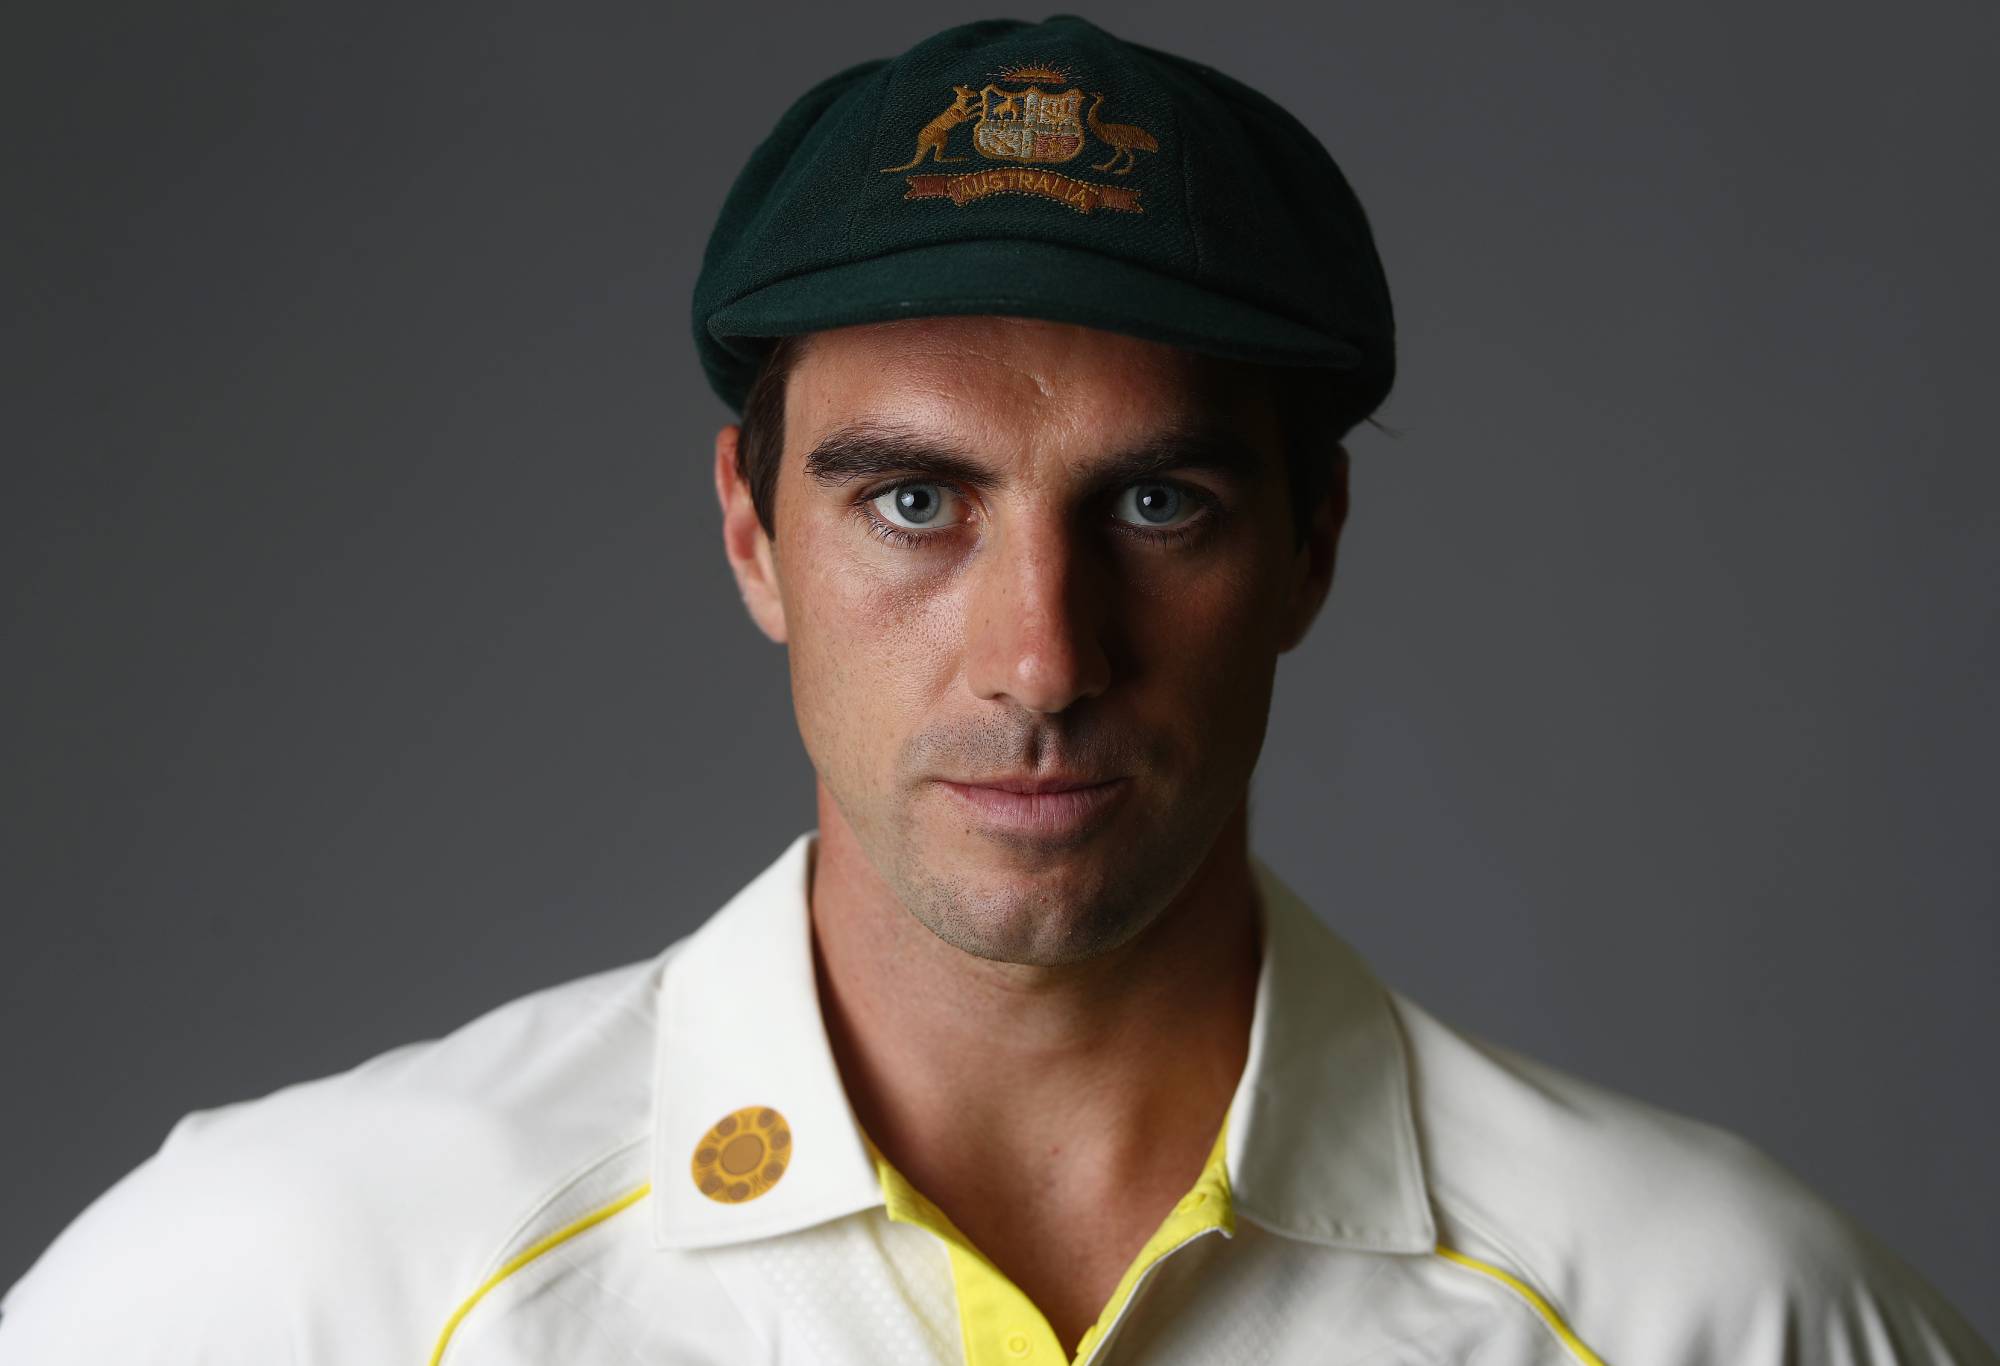 Patrick Cummins poses during the Australia Test Cricket Team headshots session at NCC on November 30, 2021 in Brisbane, Australia. (Photo by Chris Hyde/Getty Images)